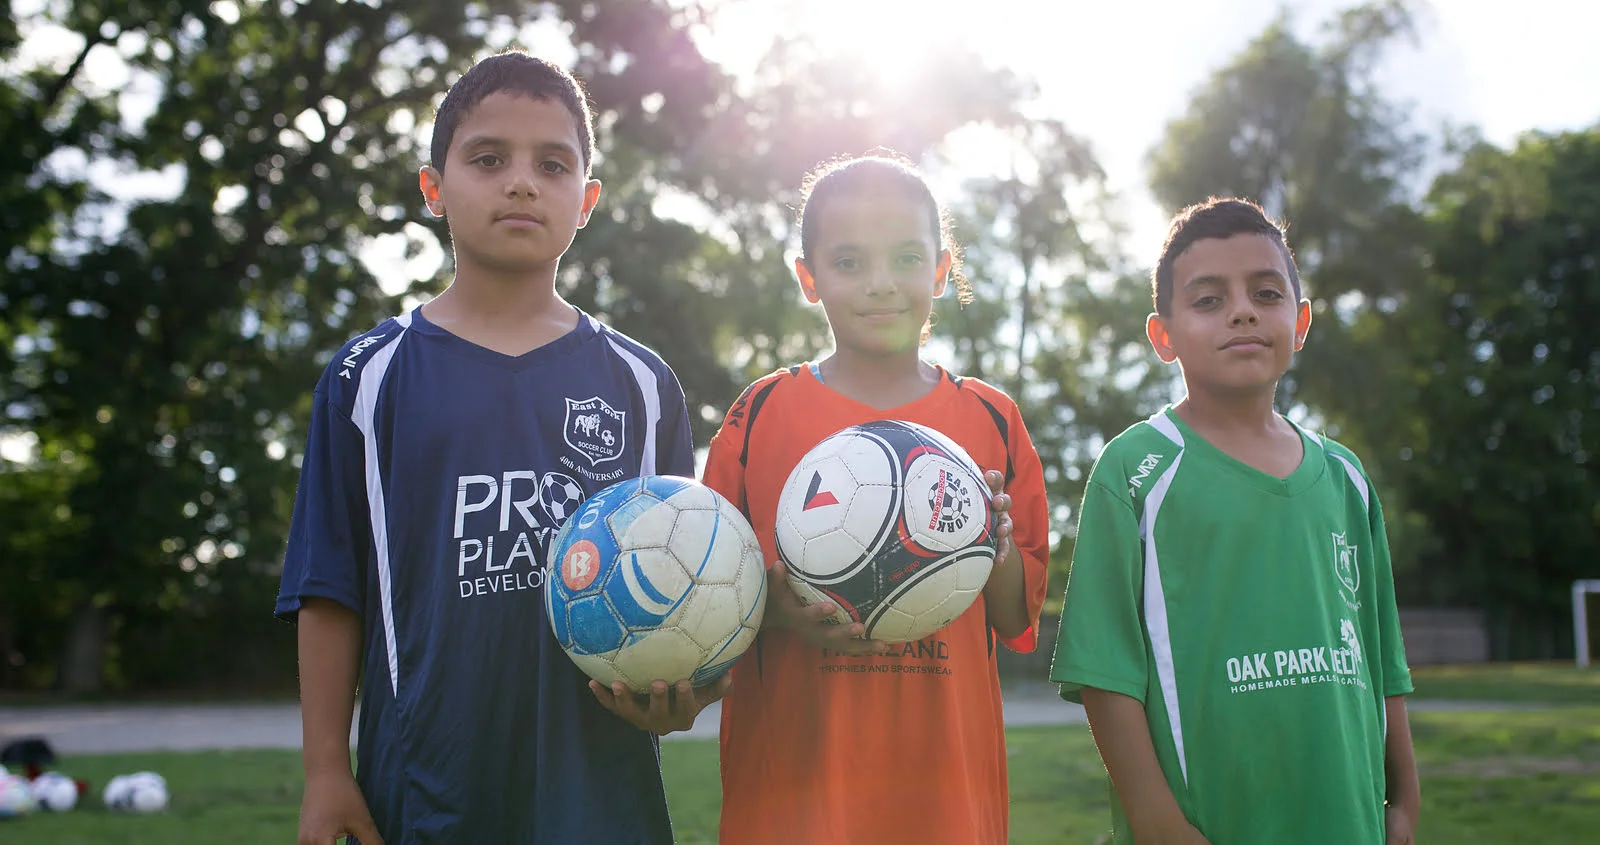 Three children holding soccer balls and wearing soccer jerseys in a sunlit park.